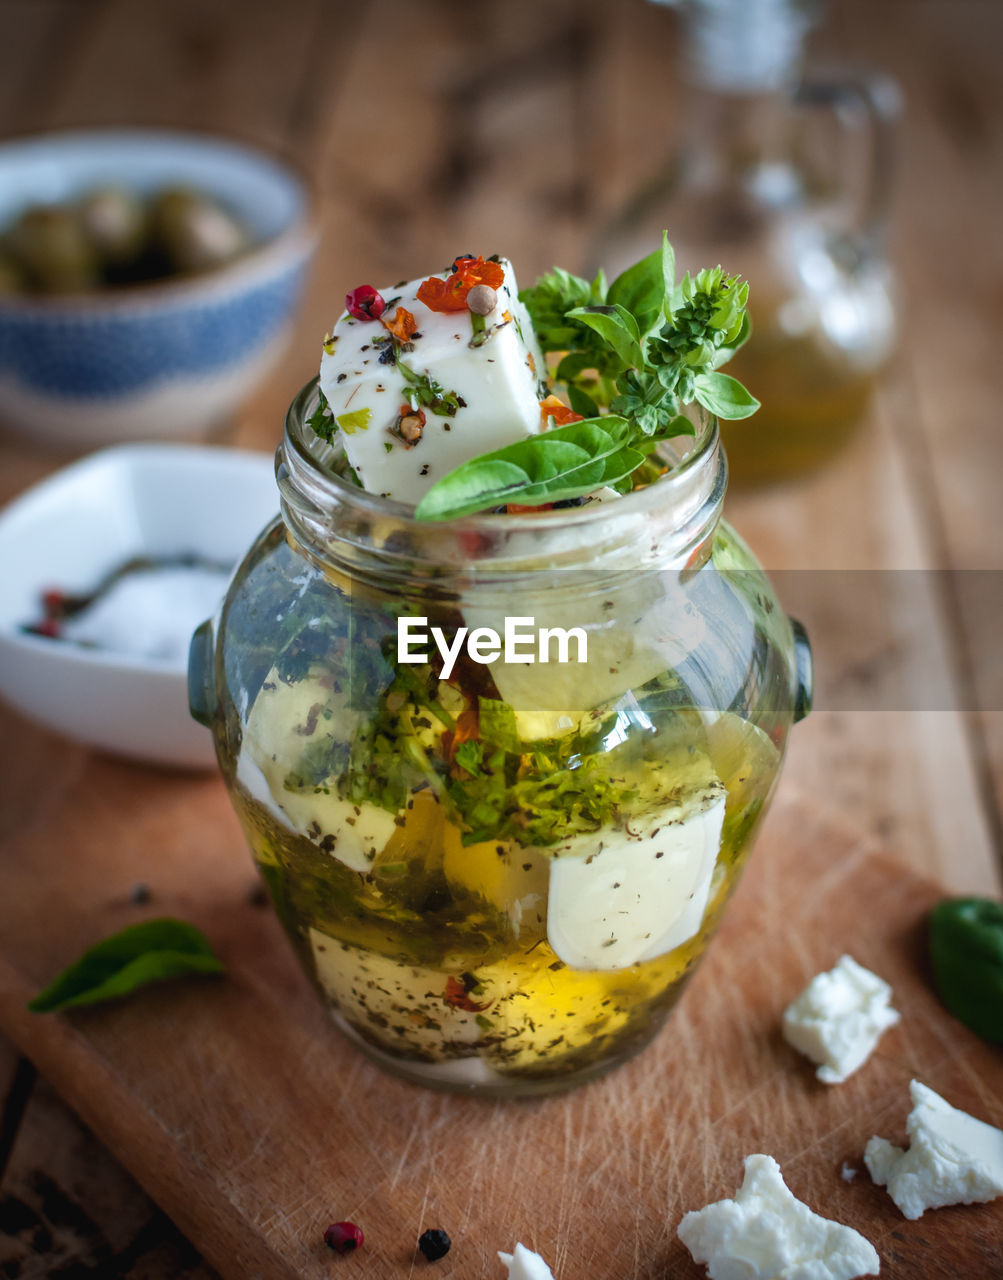 food and drink, food, wood, healthy eating, herb, dish, freshness, wellbeing, spice, jar, produce, vegetable, fruit, no people, plant, meal, indoors, glass, basil, leaf, cuisine, studio shot, container, dairy, rustic, table, mint leaf - culinary, garnish